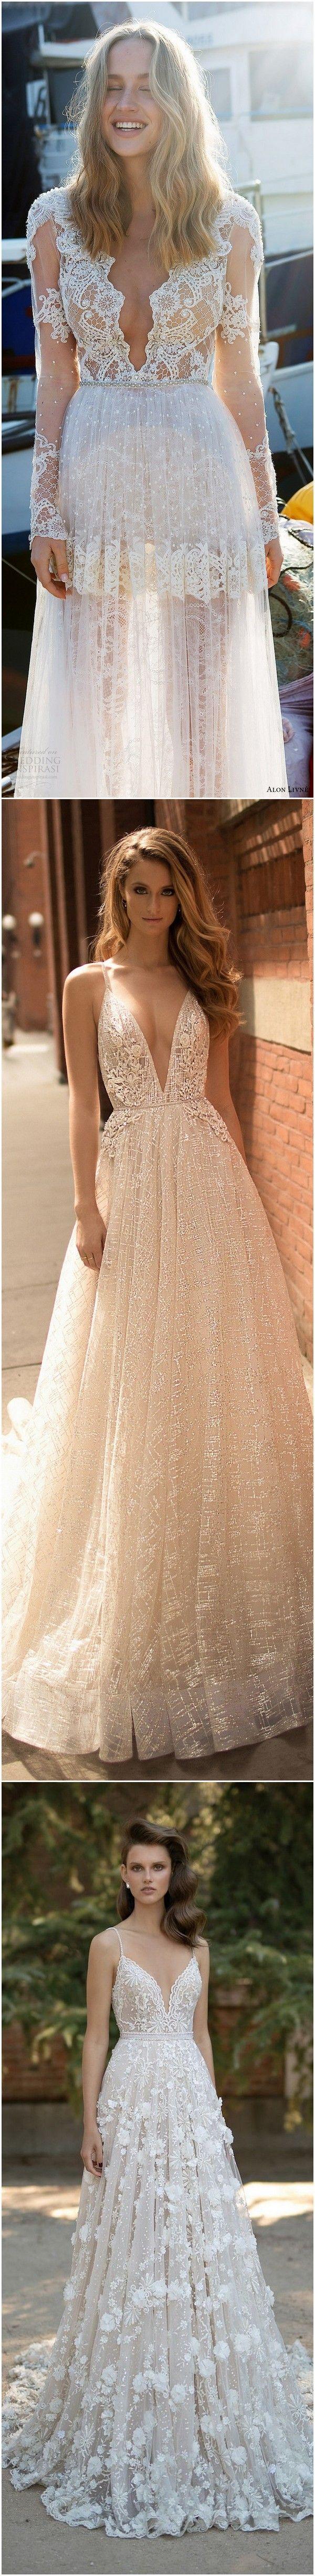 Wedding - Top 20 Vintage Wedding Dresses For 2017 Trends - Page 4 Of 4